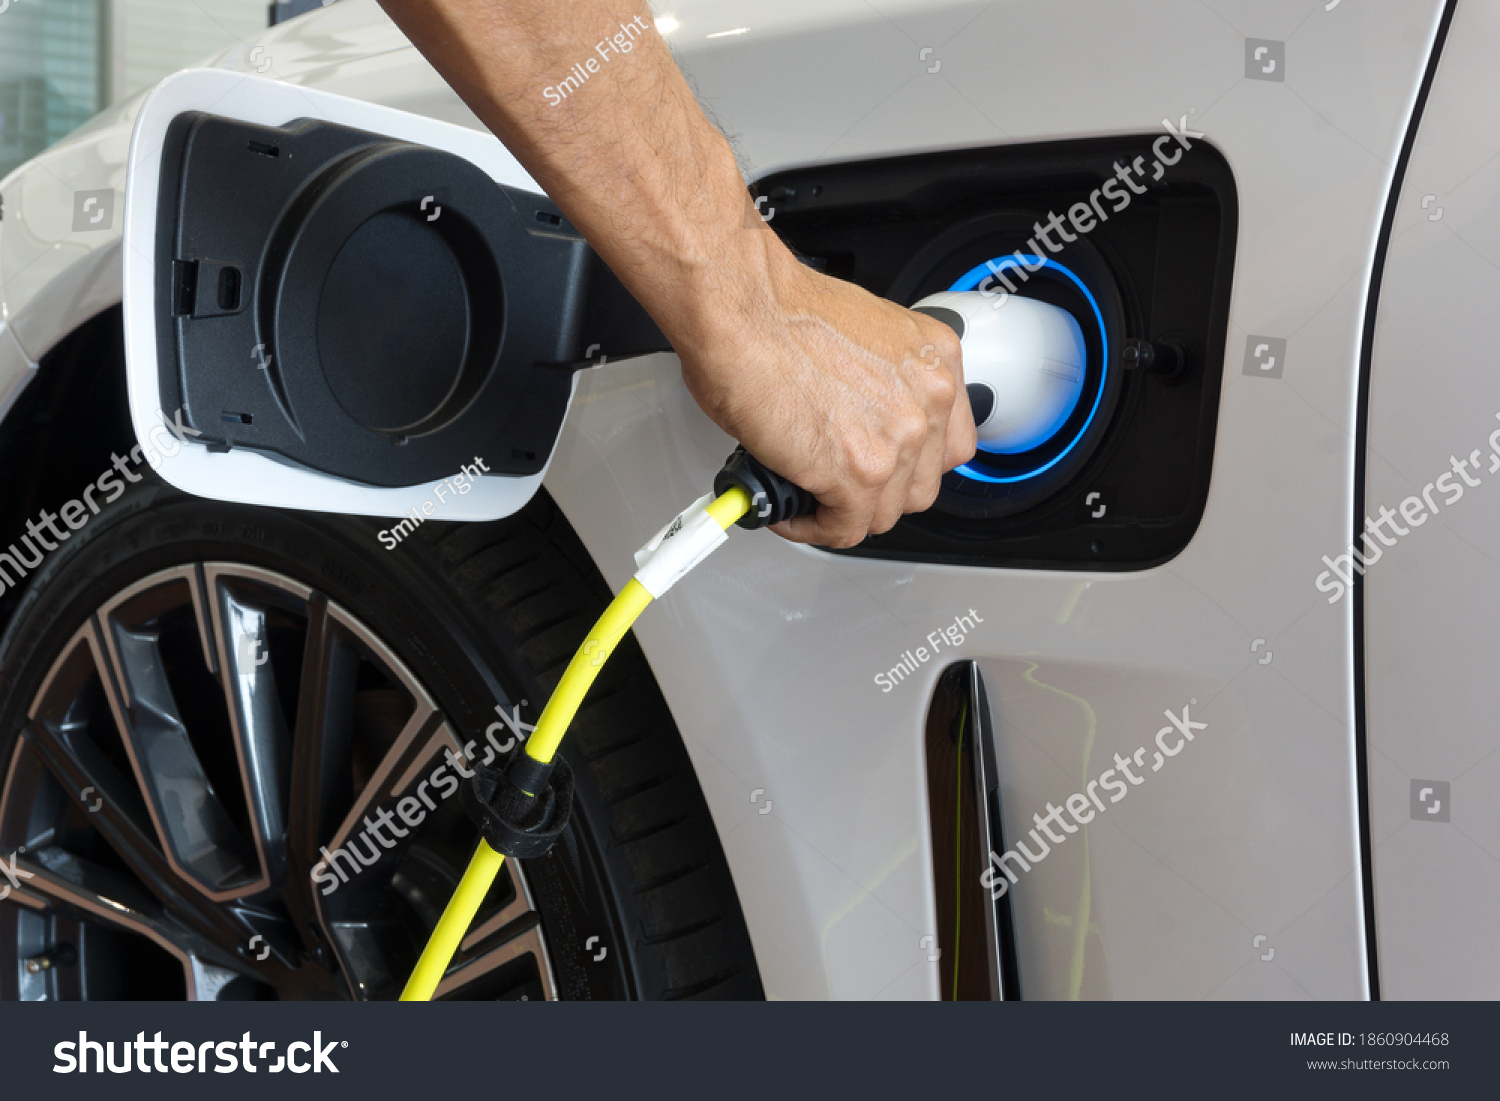 Man hand is holding Electric car charging connect to elecric car on charge station, Electric mobility environment friendly 	 #1860904468